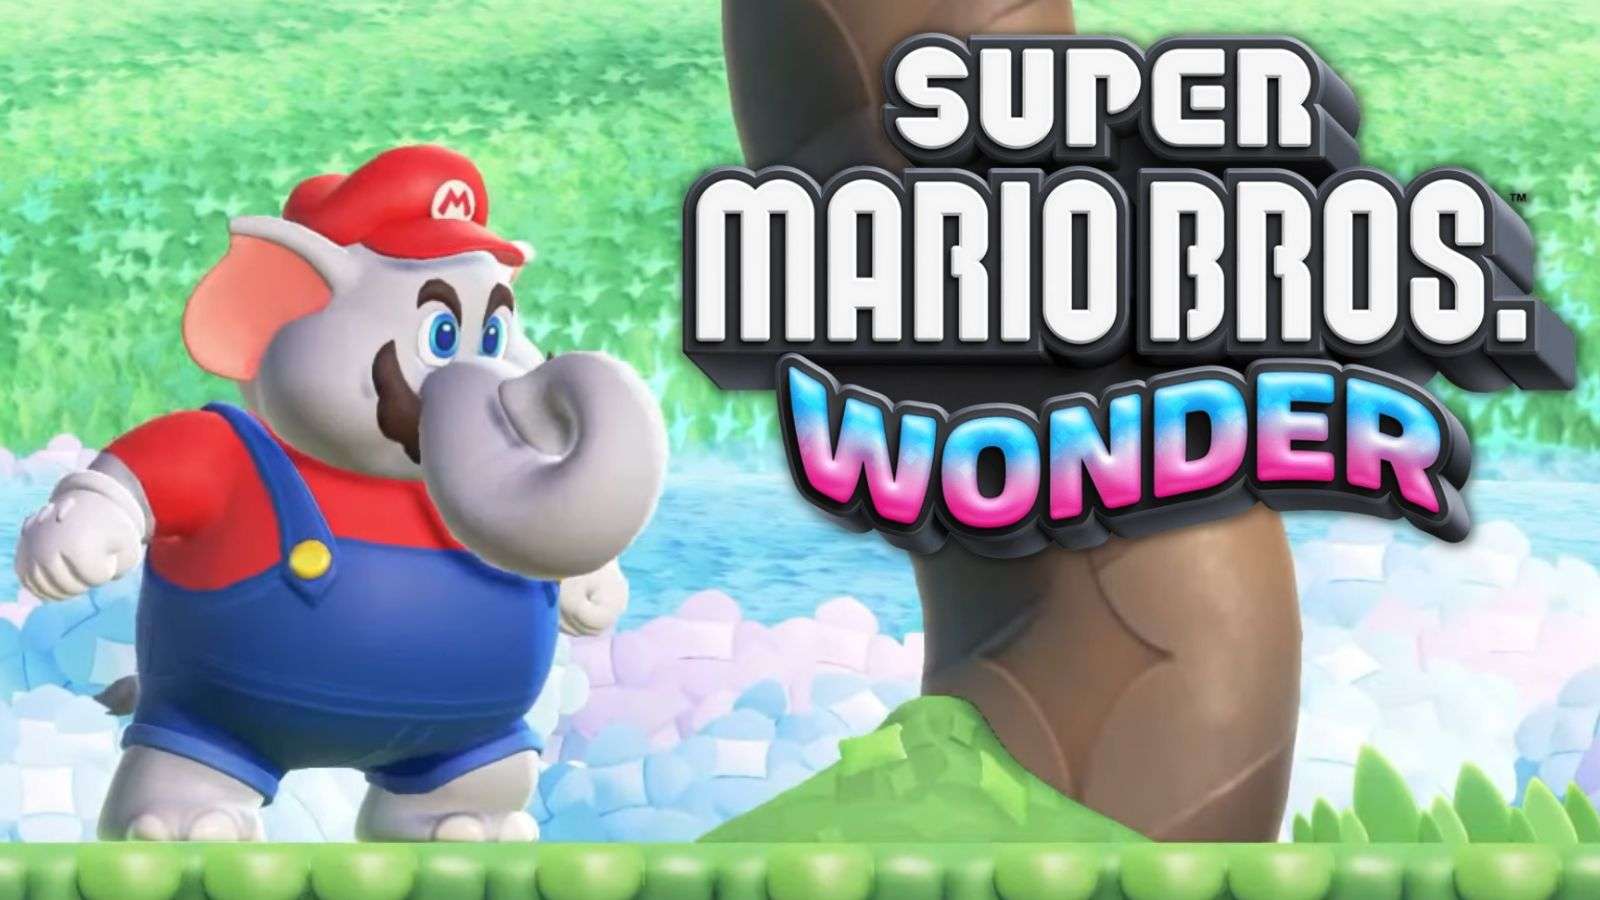 All New Power-Ups Confirmed for Super Mario Bros Wonder